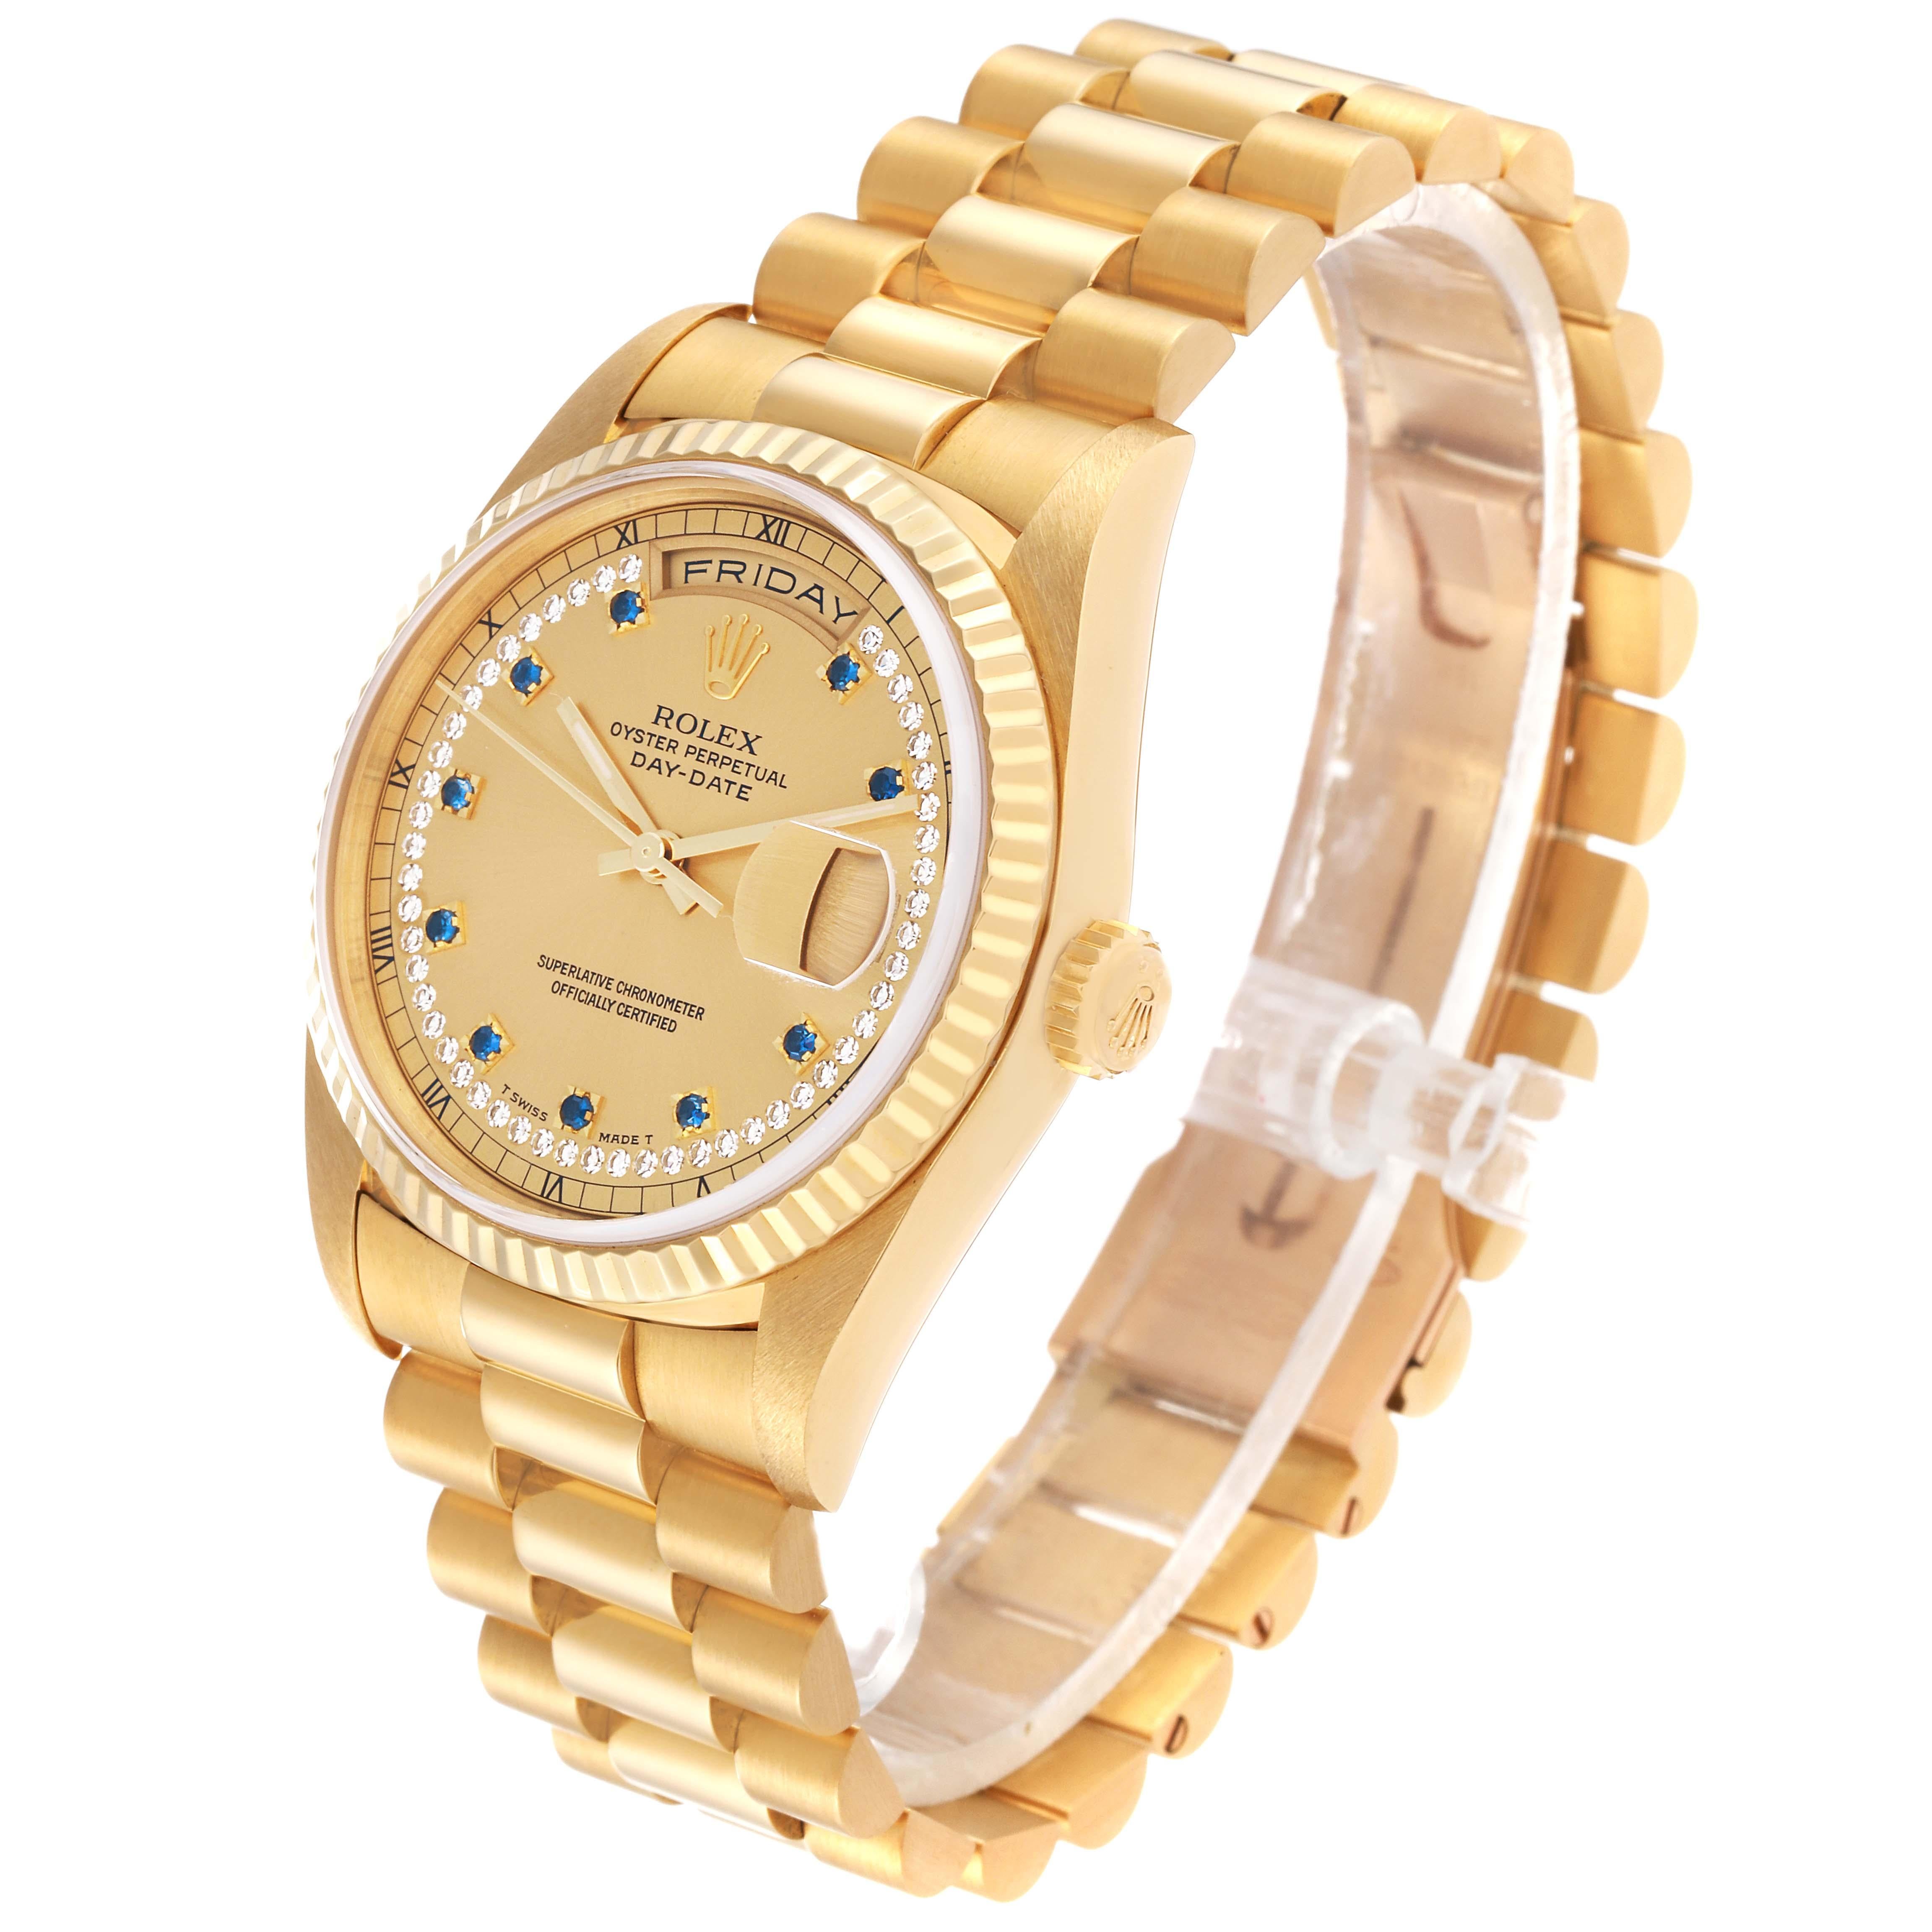 Rolex Day-Date President Yellow Gold String Diamond Sapphire Mens Watch 18238. Officially certified chronometer automatic self-winding movement. 18k yellow gold oyster case 36.0 mm in diameter. Rolex logo on the crown. 18k yellow gold fluted bezel.